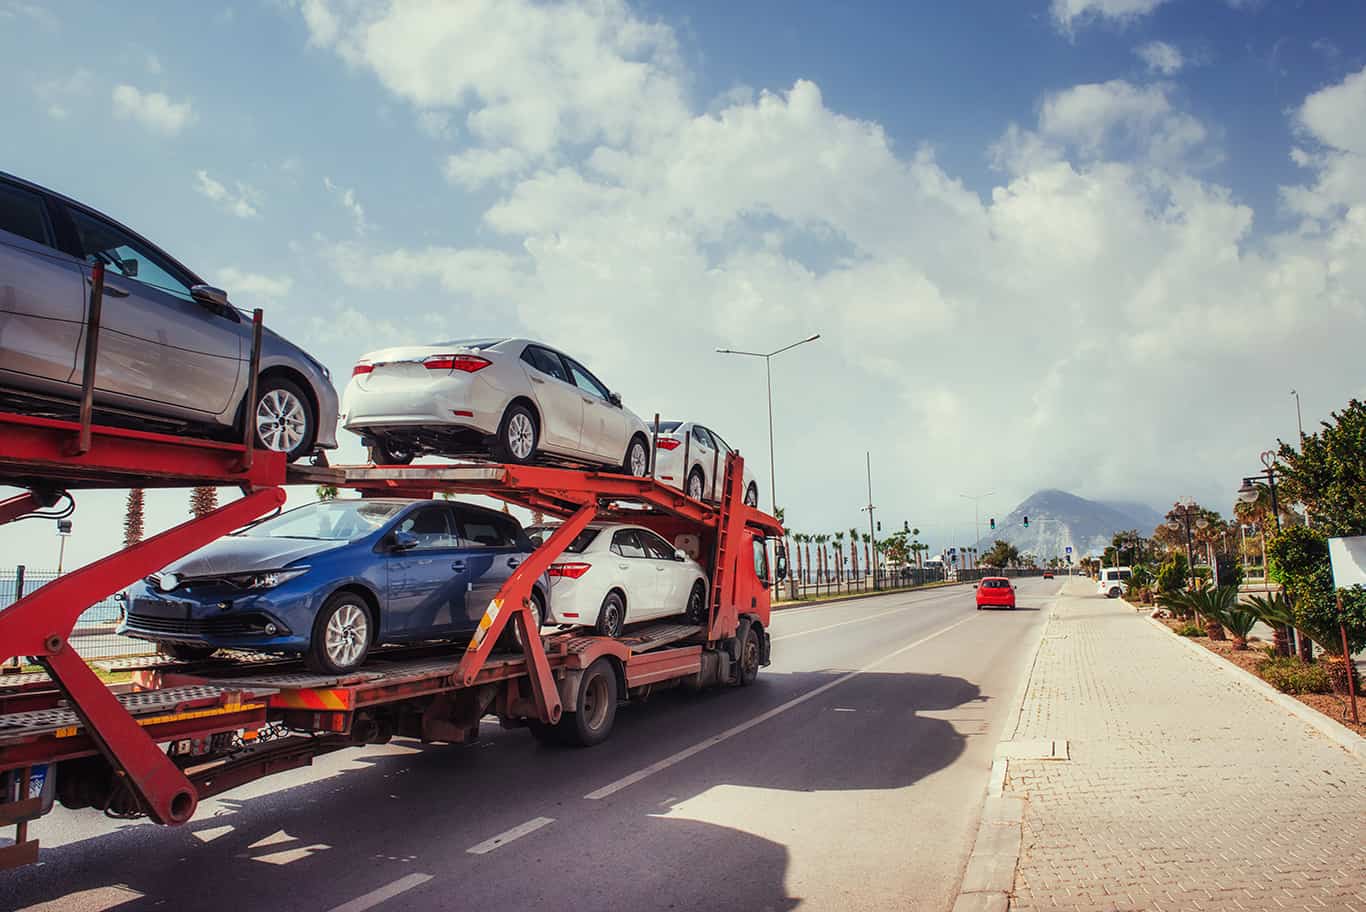 Car Shipping: How to Ship Your Car (Safely) If You're Moving Long Distance  | Moving Advice from HireAHelper